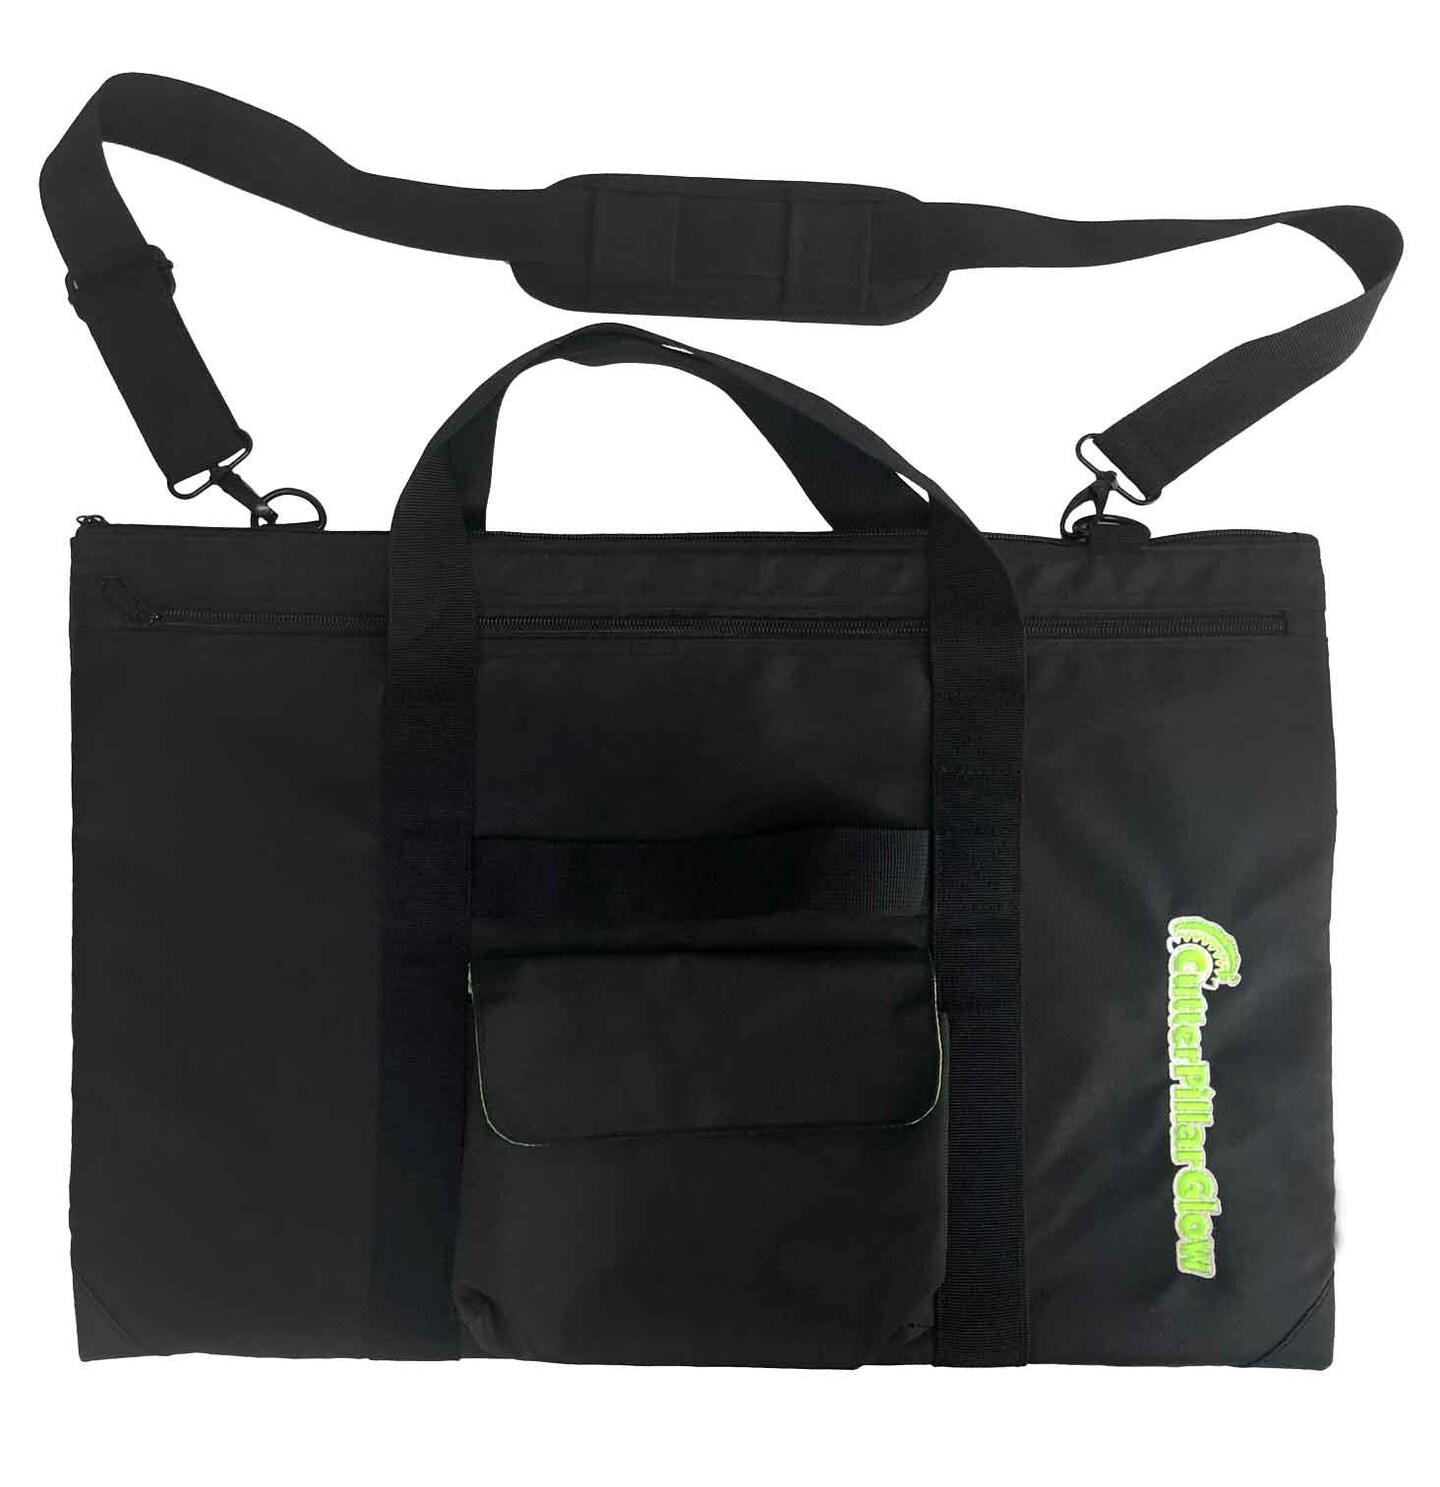 Highly Functional Paded Nylon Bag for Premium-Basic Glows With Shoulder Strap, Zipped Pockets